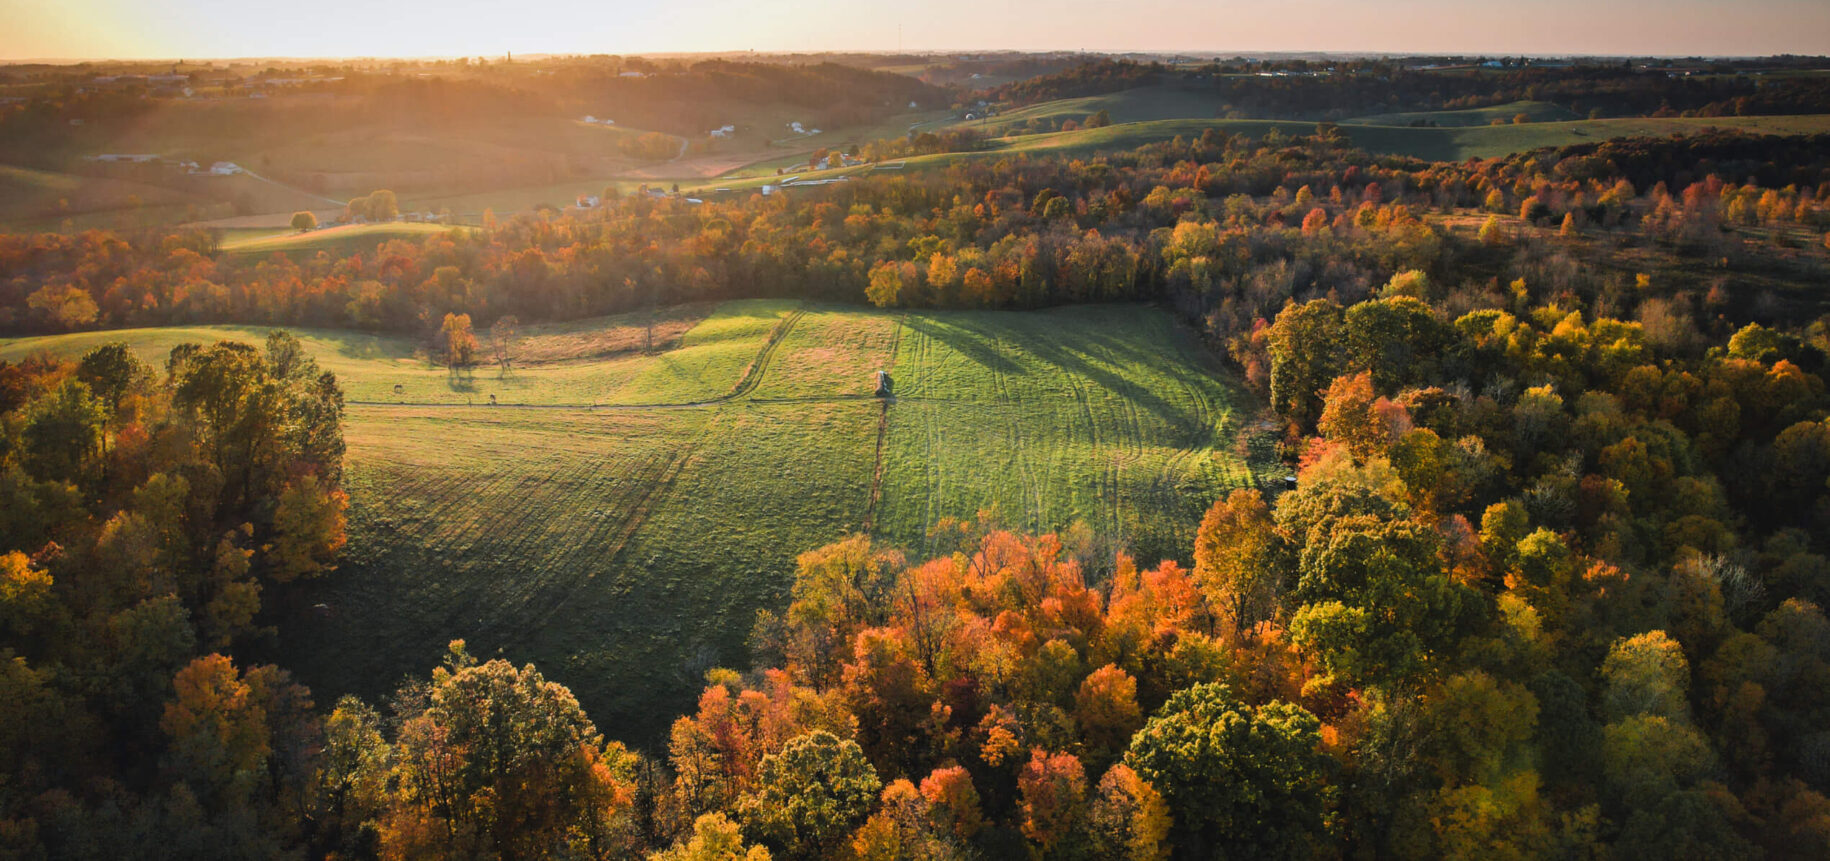 Amish Country aerial photo